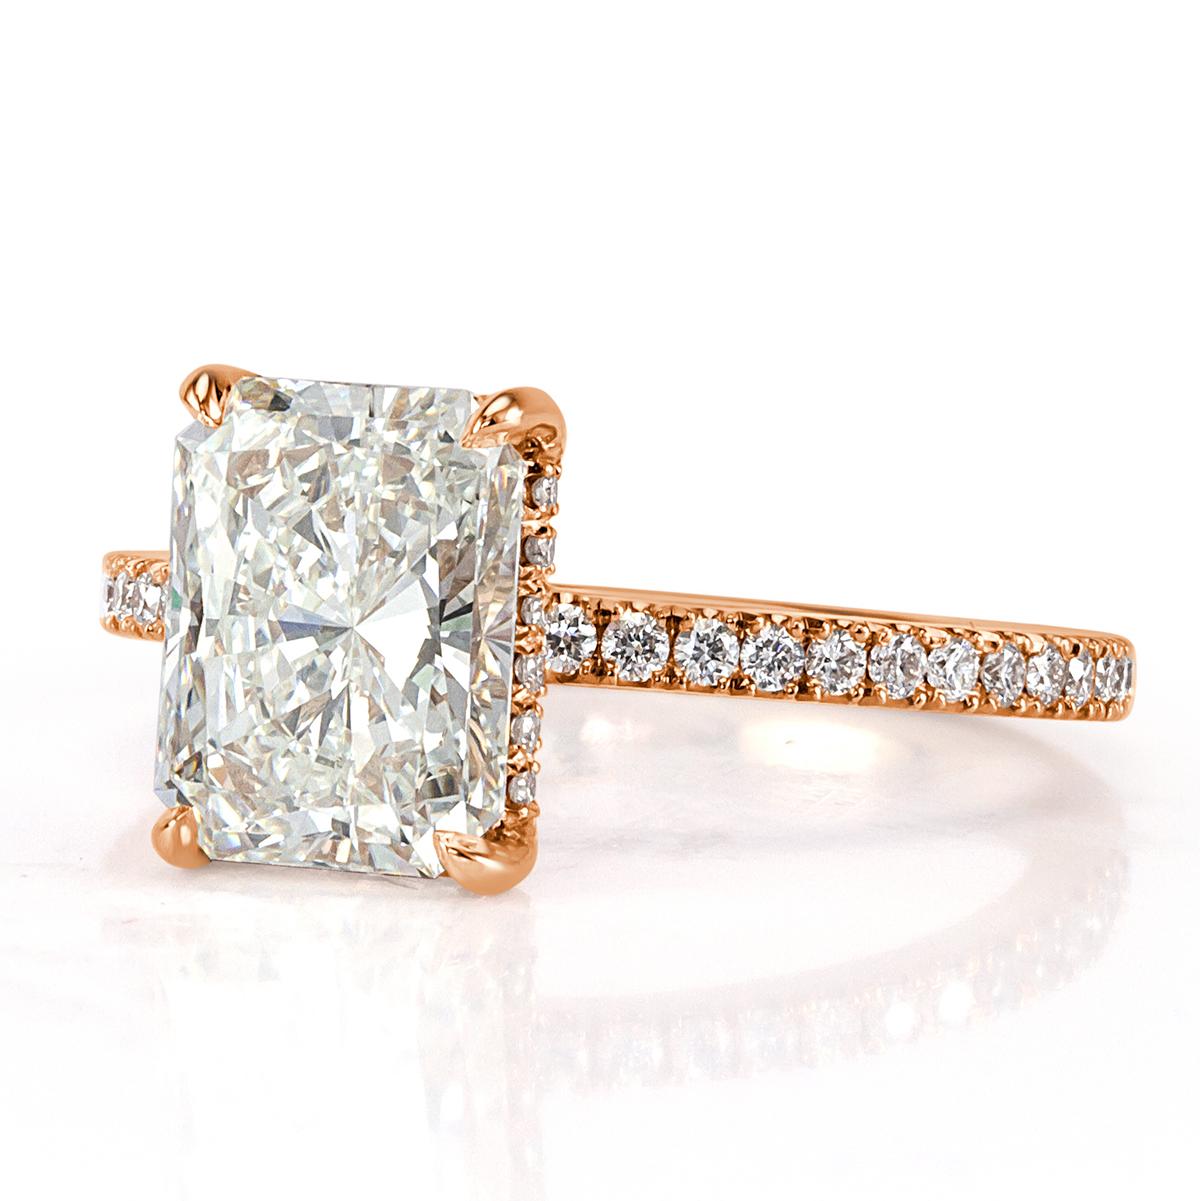 Handcrafted in 18k rose gold, this delightful diamond engagement ring showcases a gorgeous 2.50ct radiant cut center diamond, GIA certified at I-IF. It has amazing measurements of 9.07 x 6.97mm which allow this two and a half center piece to look